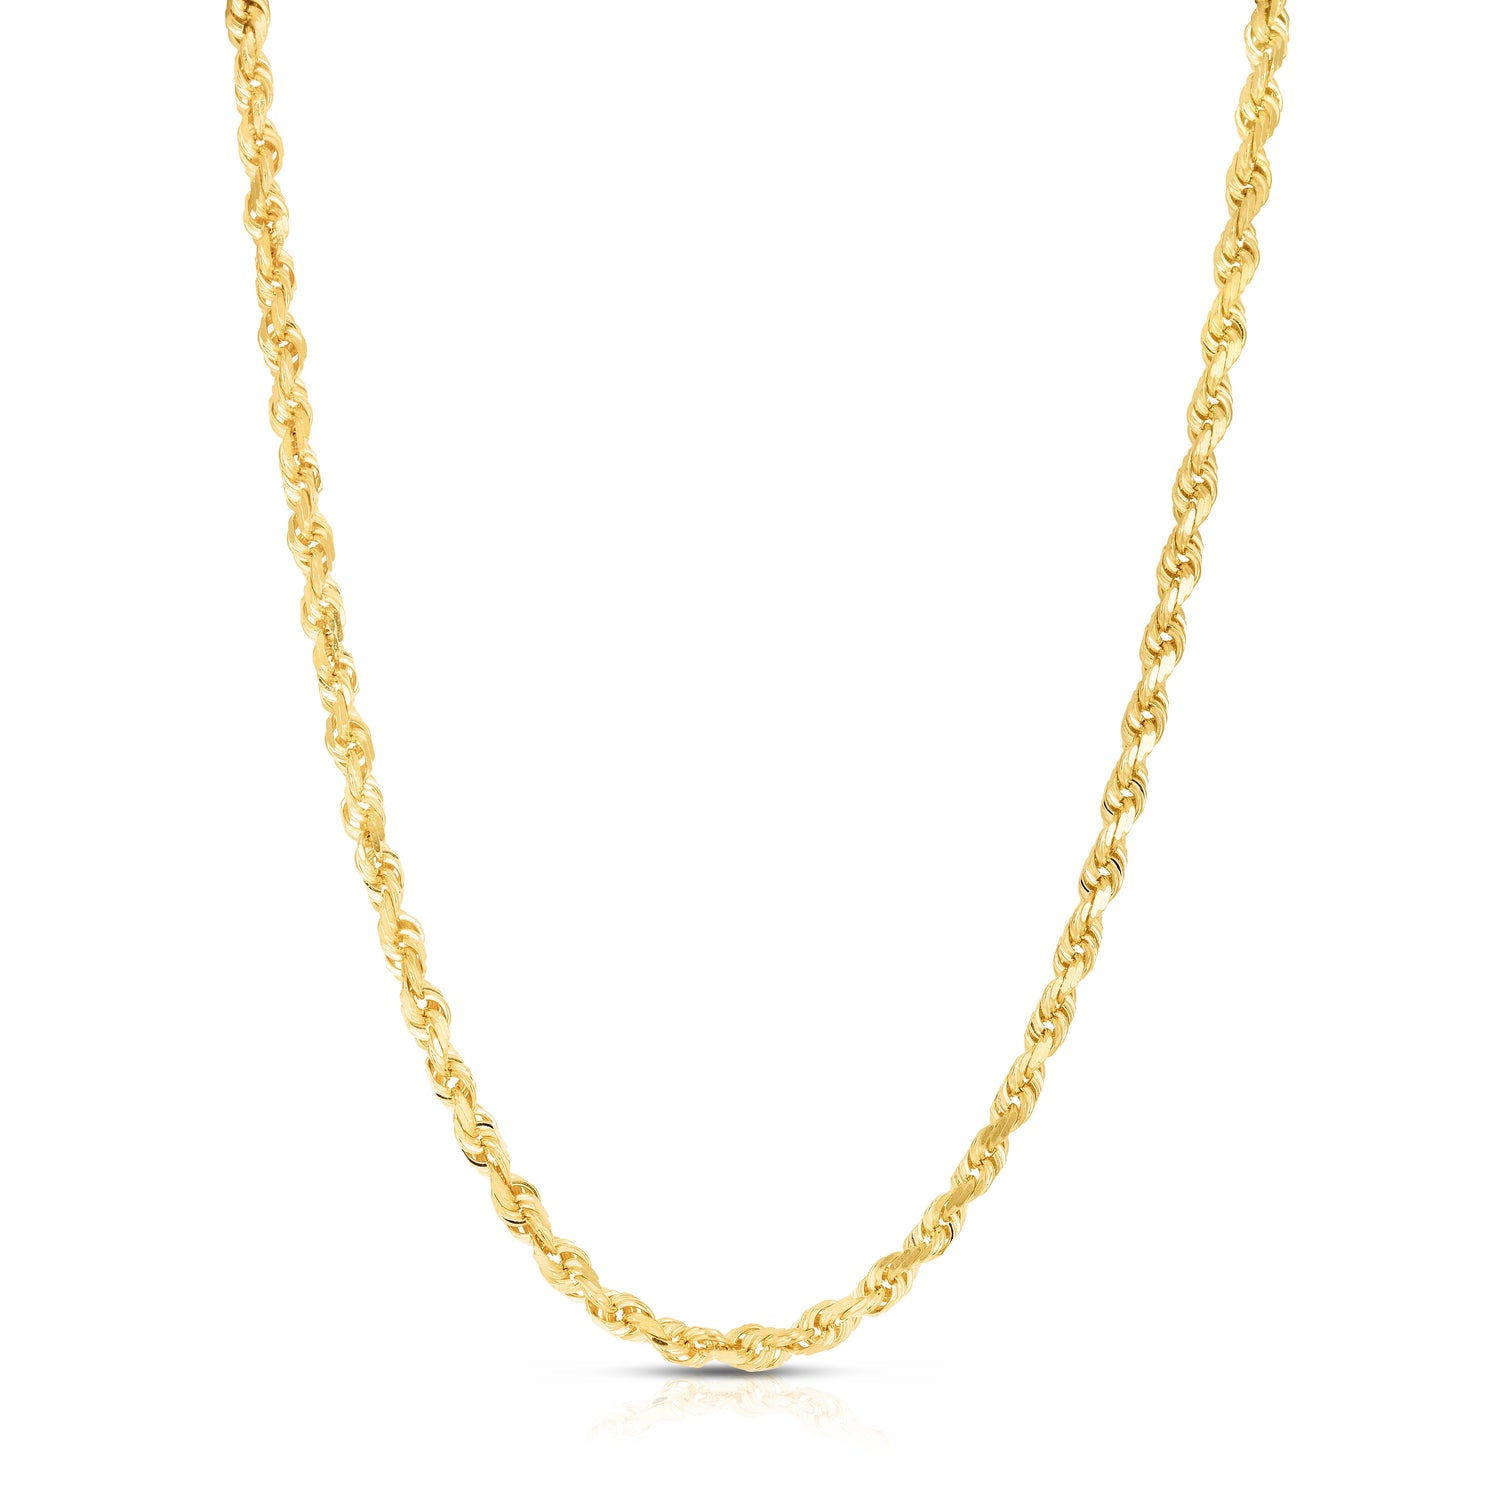 10k Yellow Gold 5mm Solid Diamond Cut Rope Chain Necklace